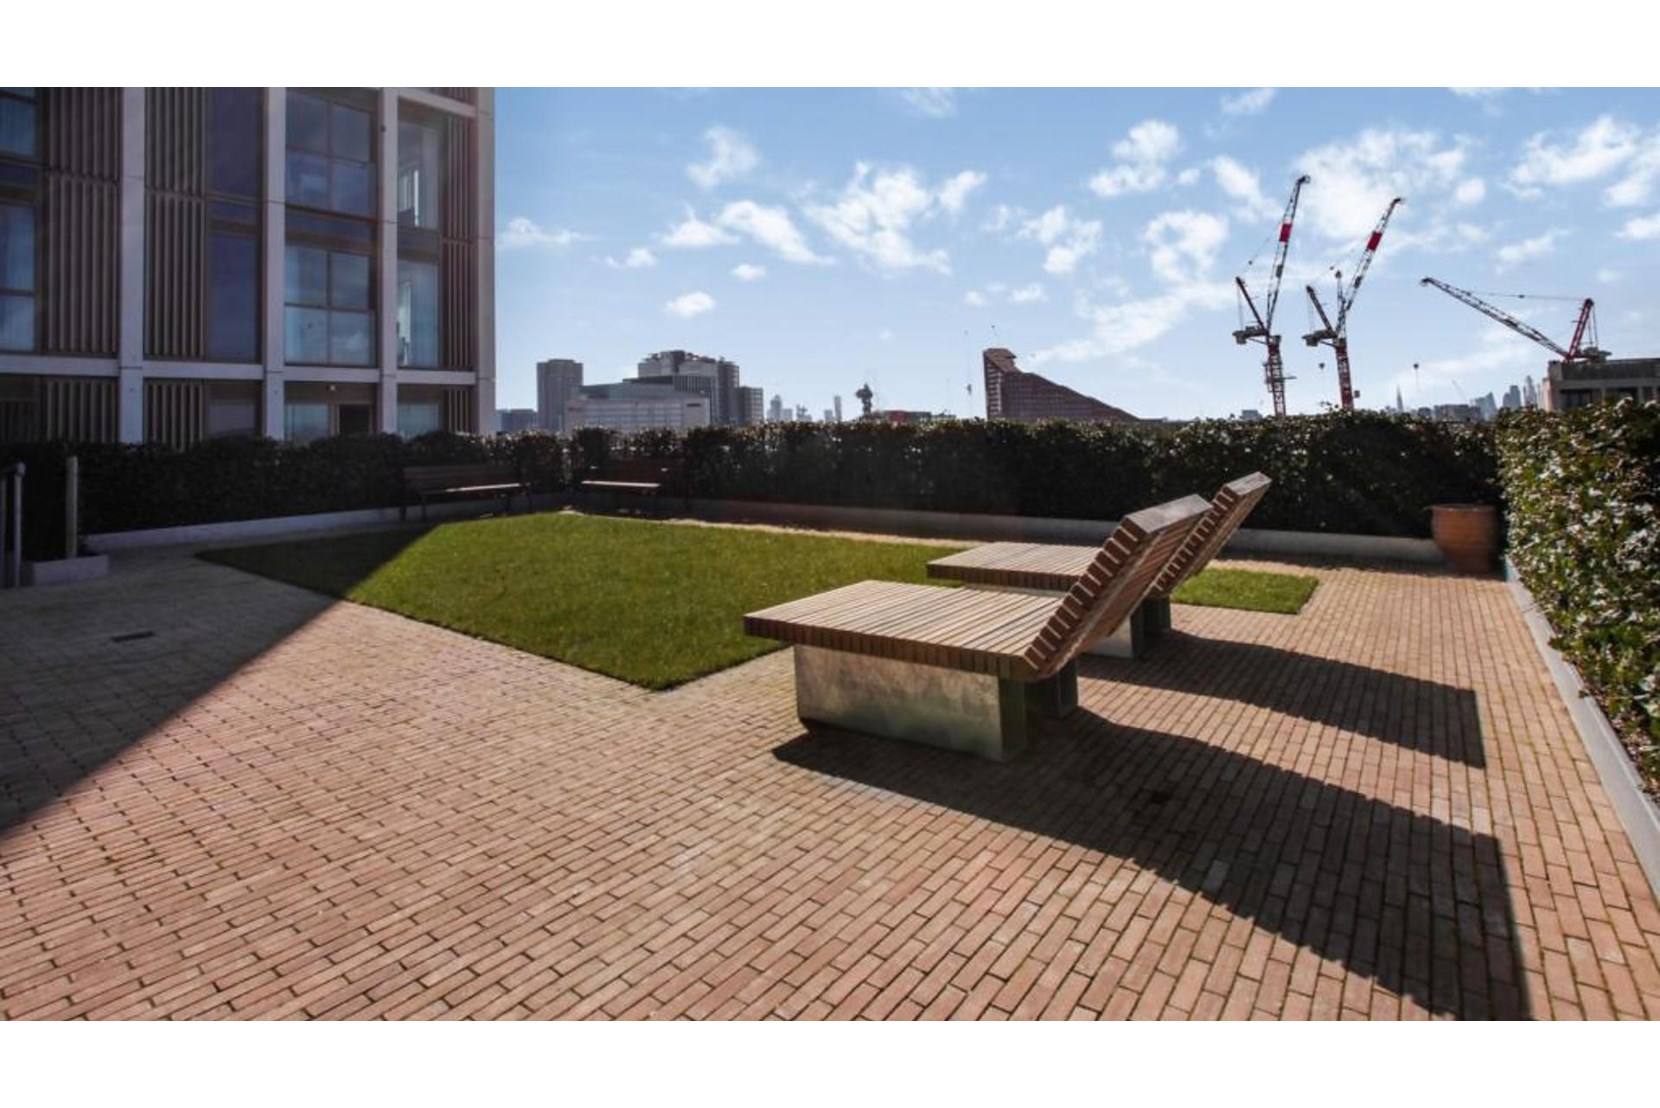 Apartments to Rent by Get Living at East Village, Newham, E20, communal gardens